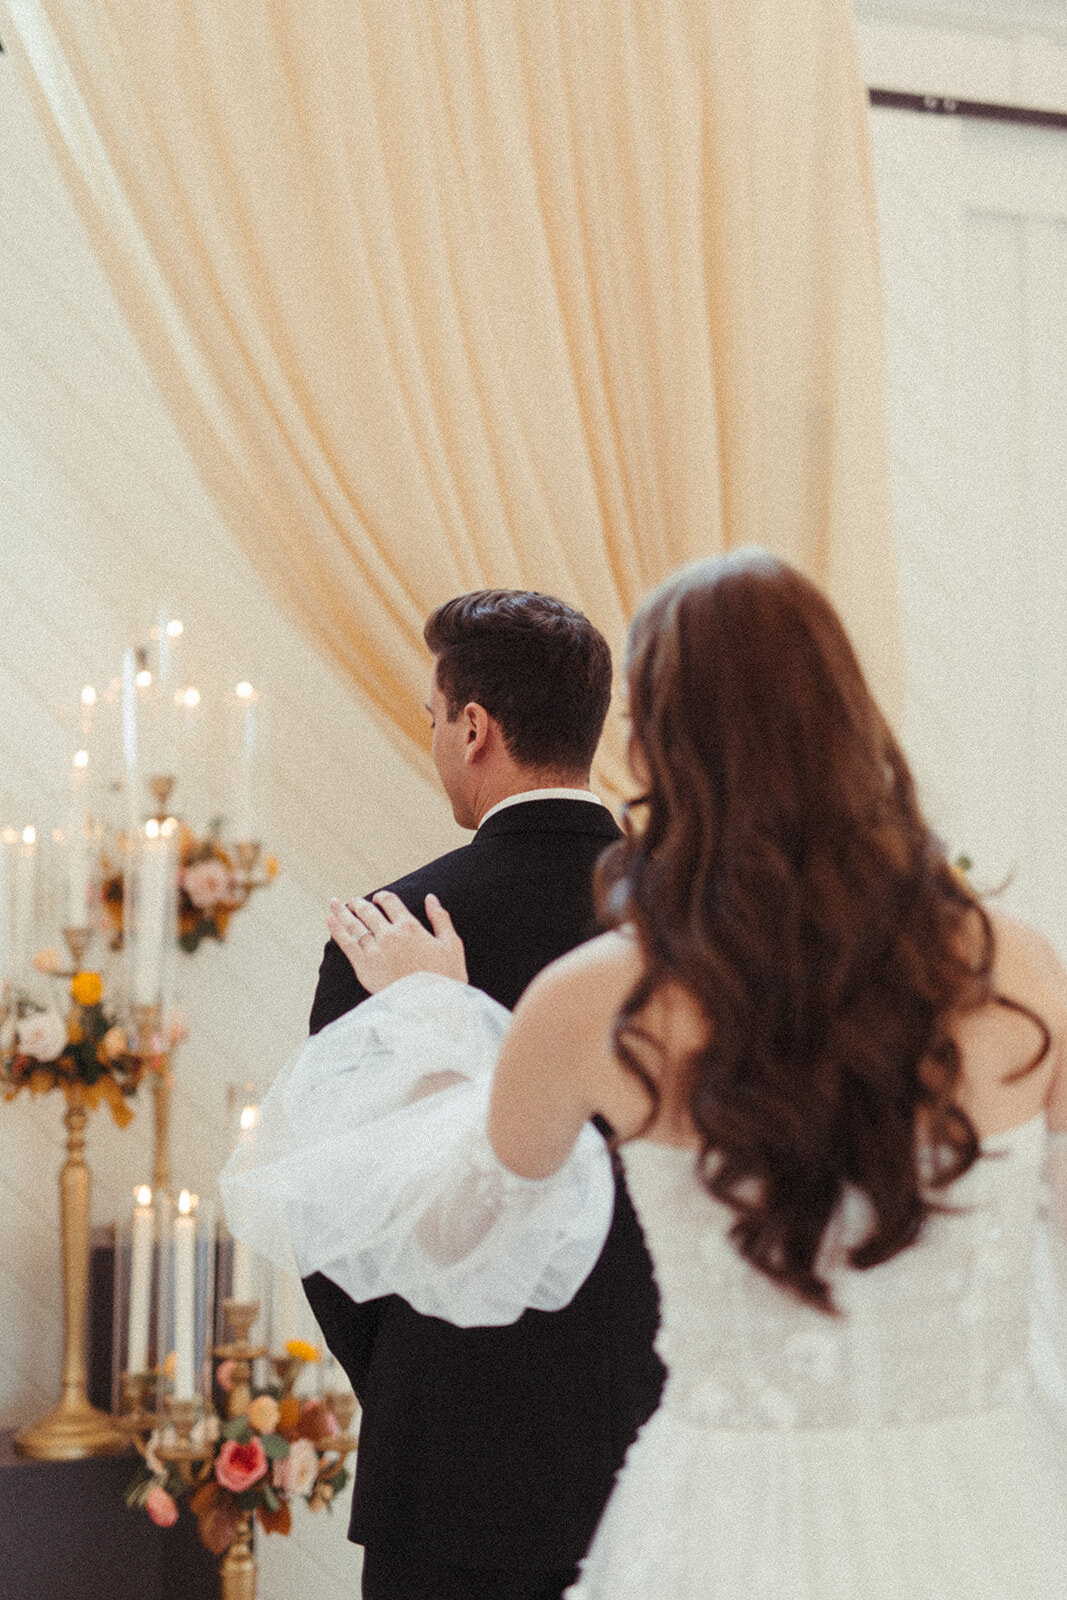 Bride and groom wearing a white wedding gown and black tuxedo stand by lit candlesticks and peach-colored curtains.